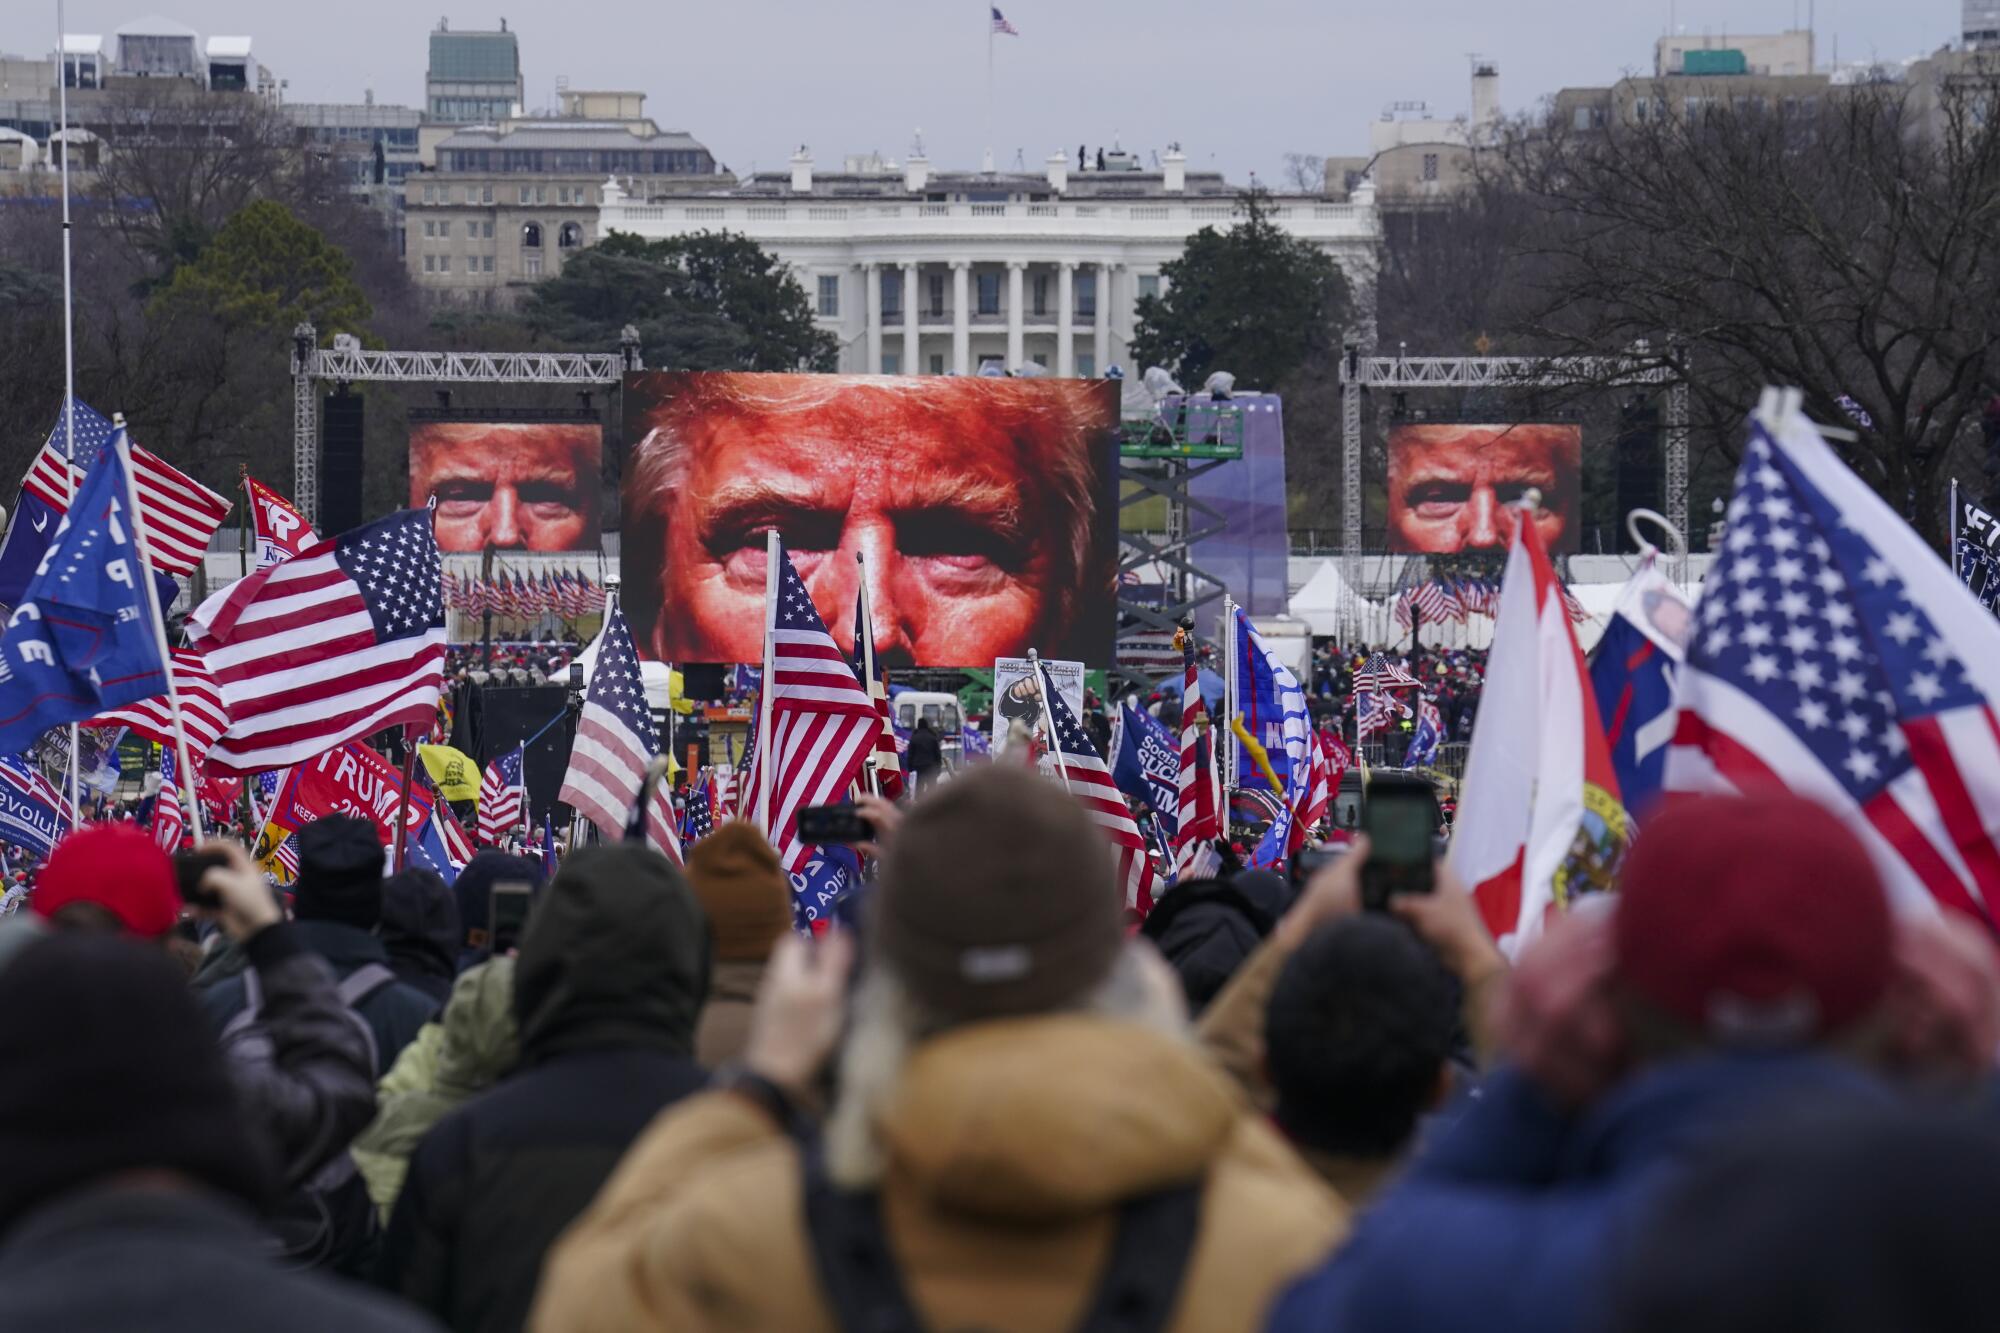 Trump supporters rally in Washington with giant screens showing of the top half of Trump's face 